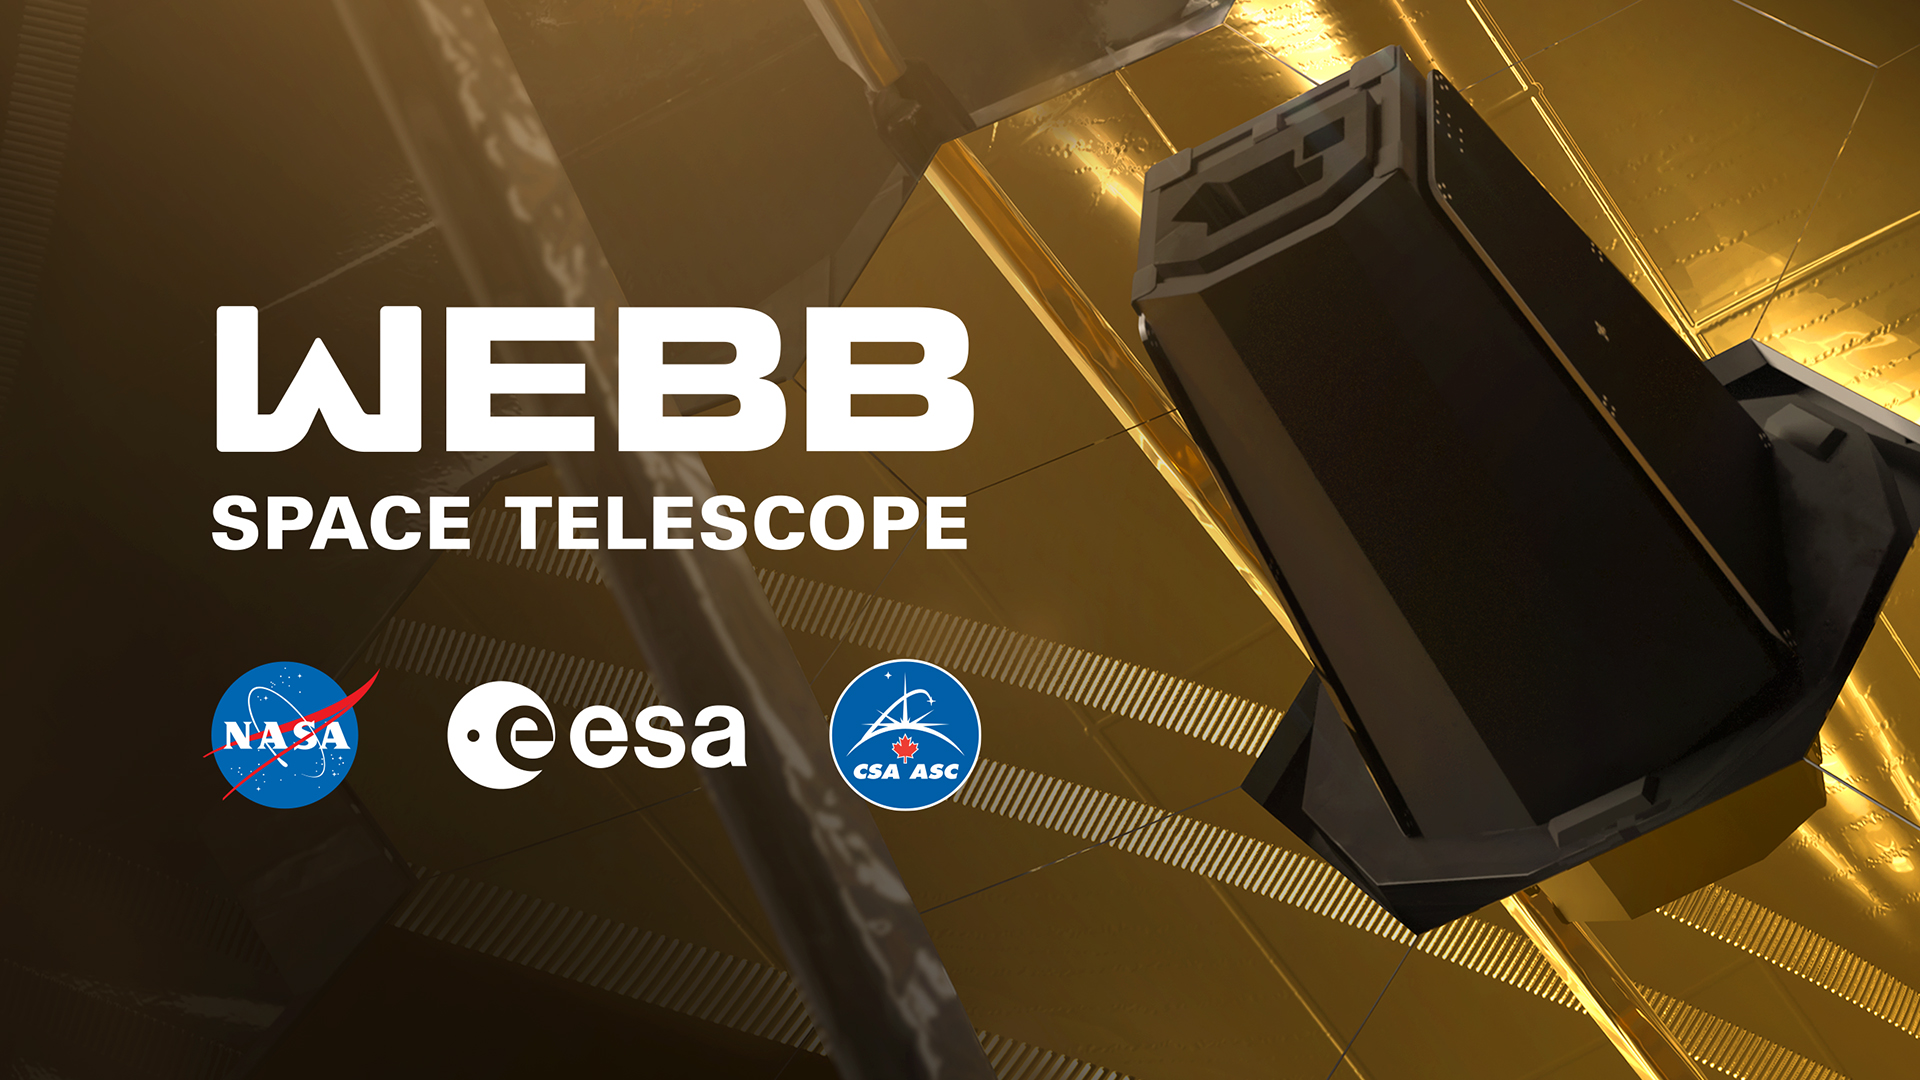 Close up image of Webb Telescope with space agency logos.